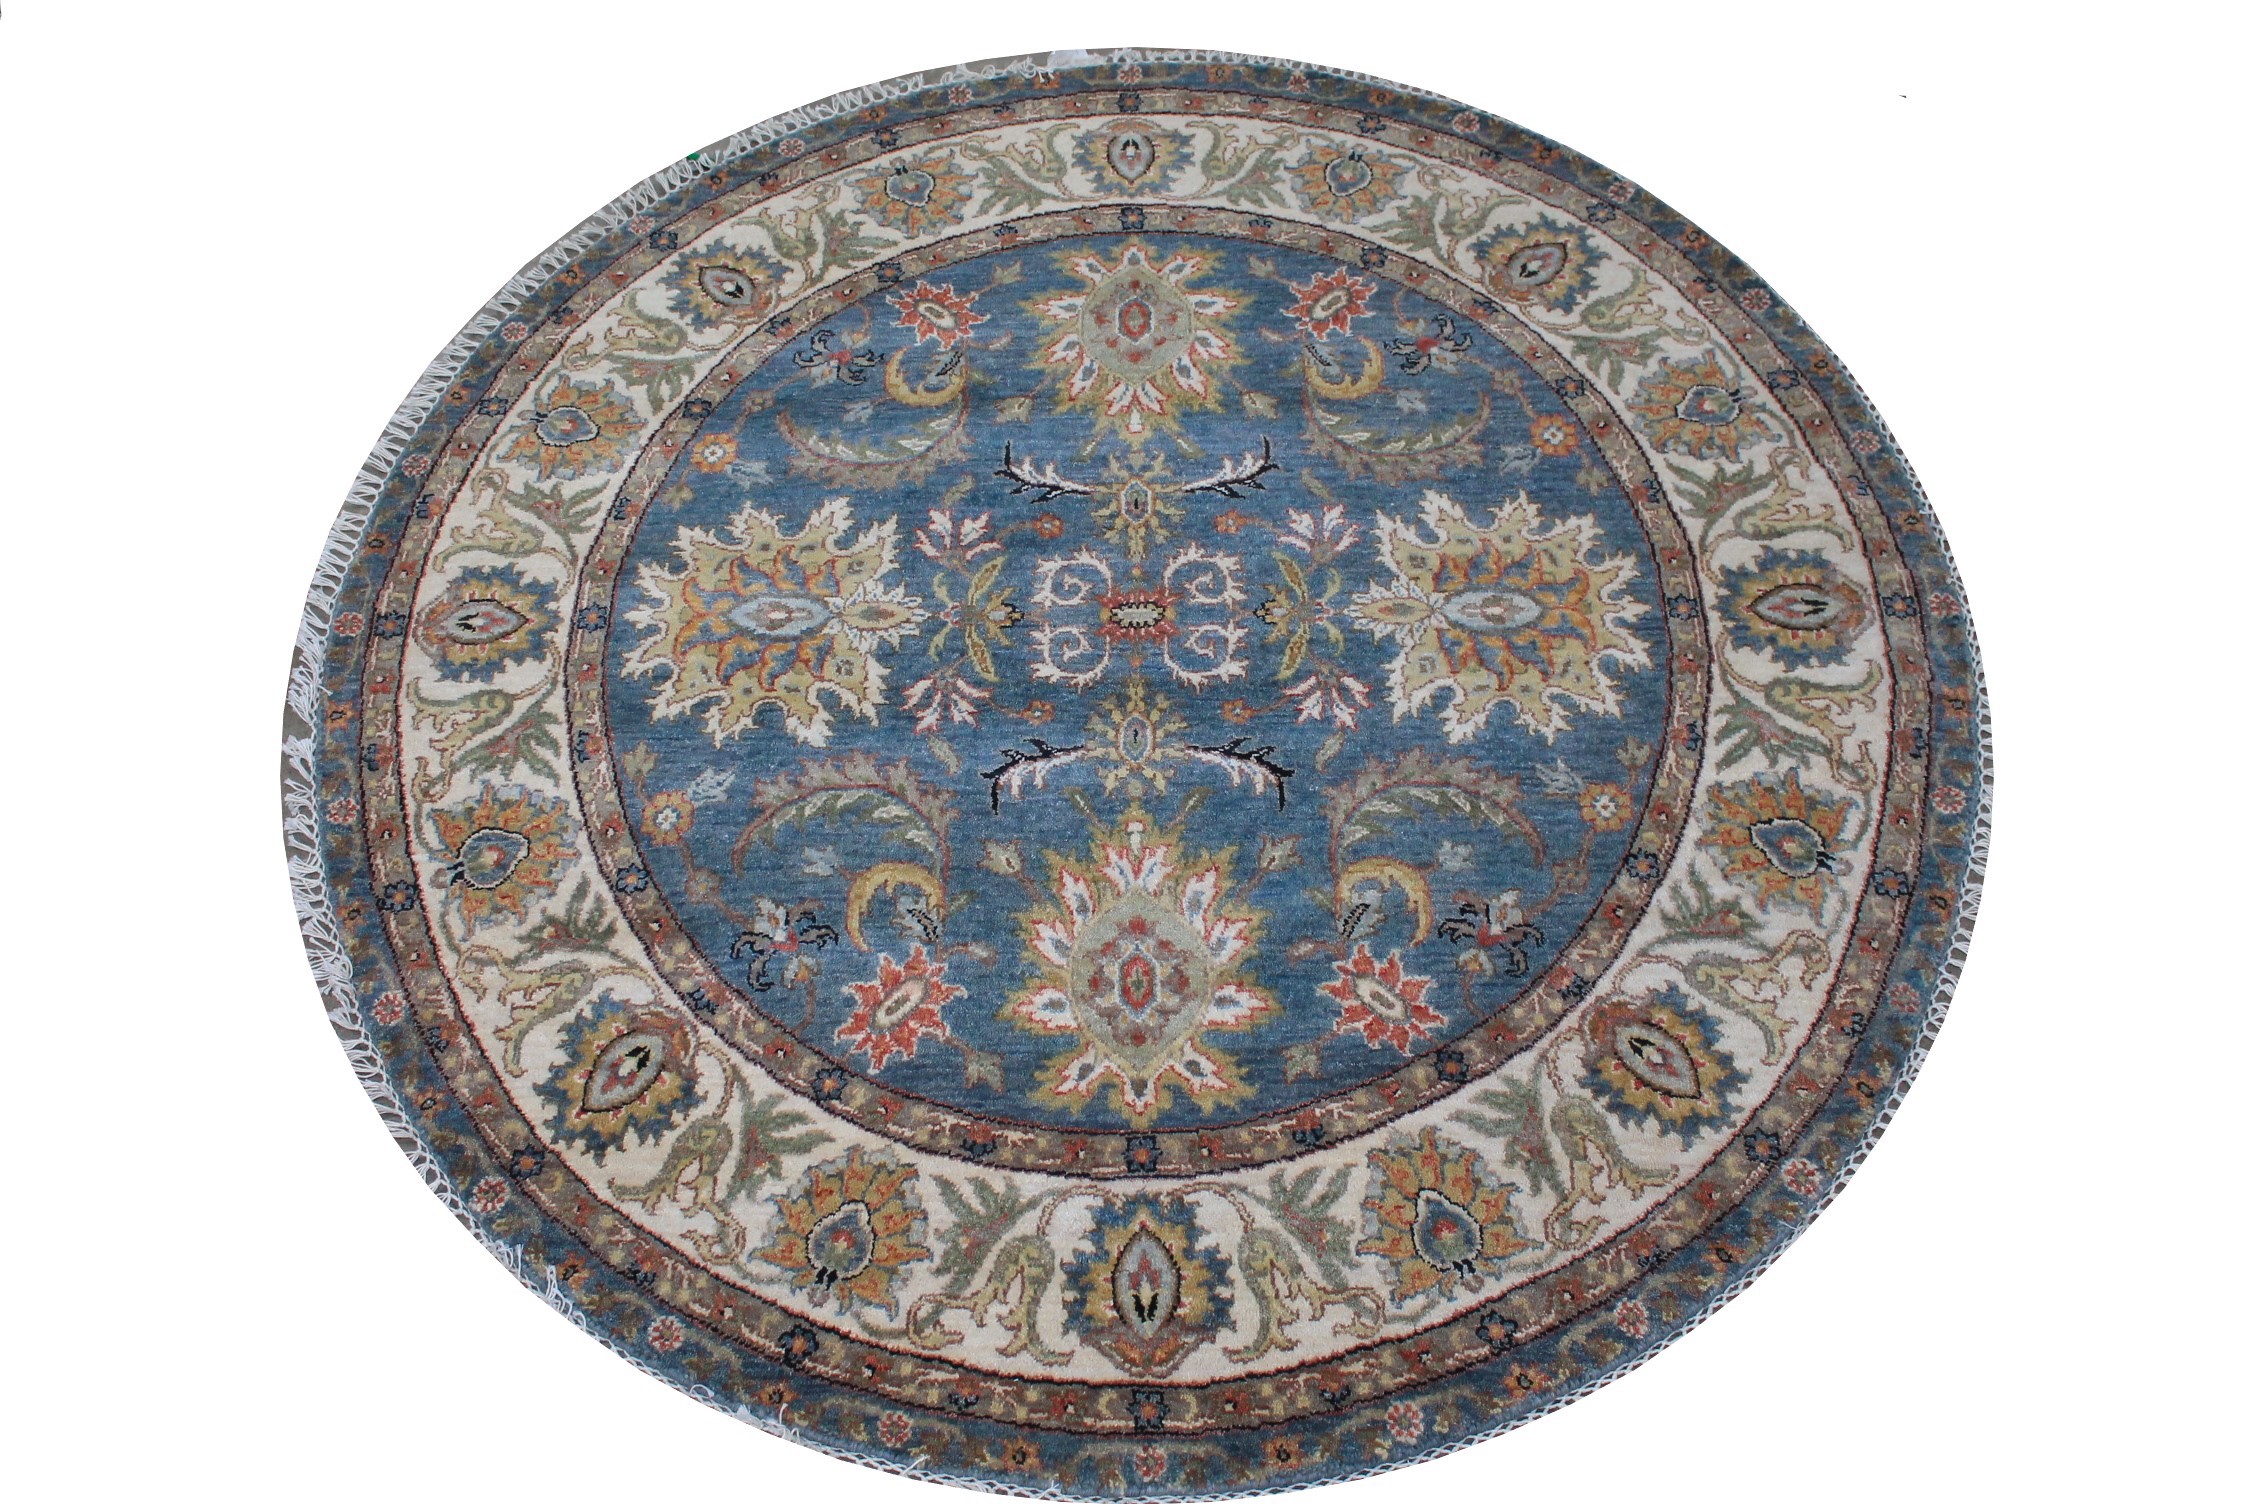 5 ft. Round & Square Traditional Hand Knotted Wool Area Rug - MR025636